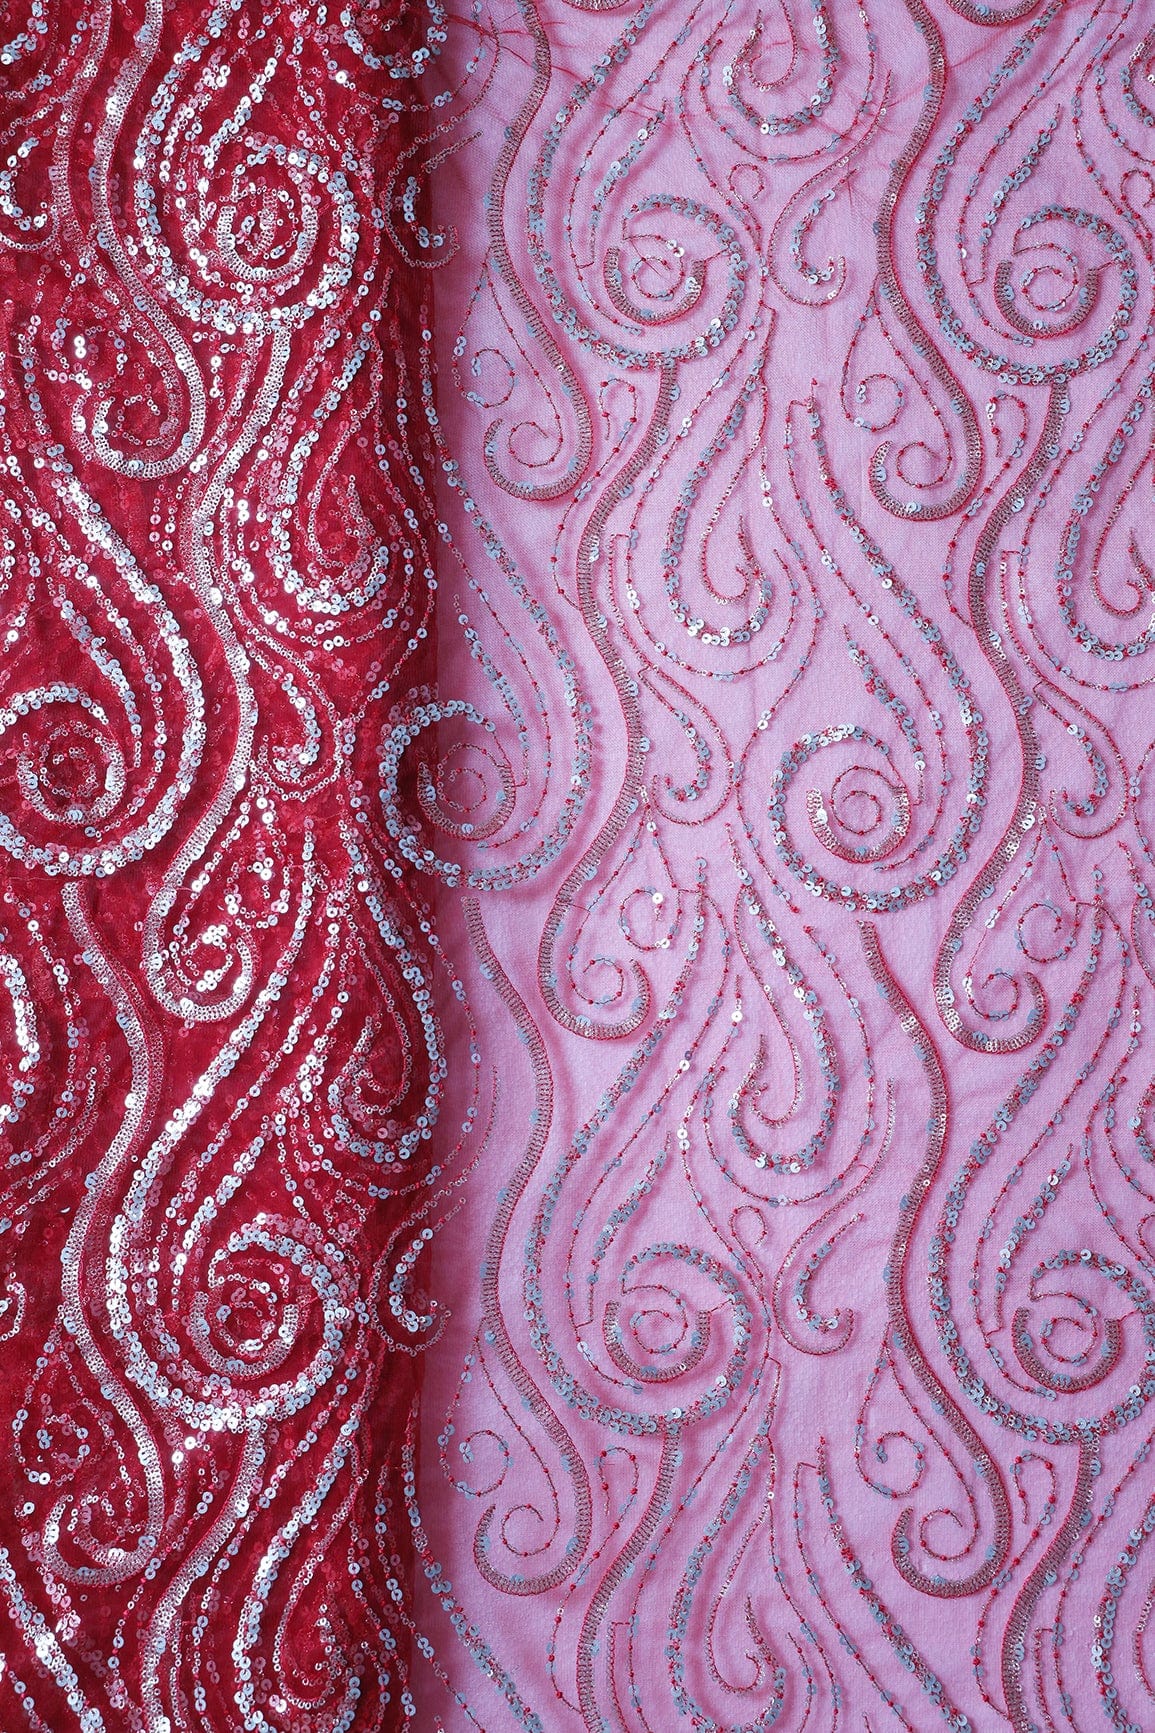 doeraa Embroidery Fabrics Gorgeous Multi Sequins Geometric Embroidery On Red Soft Net Fabric